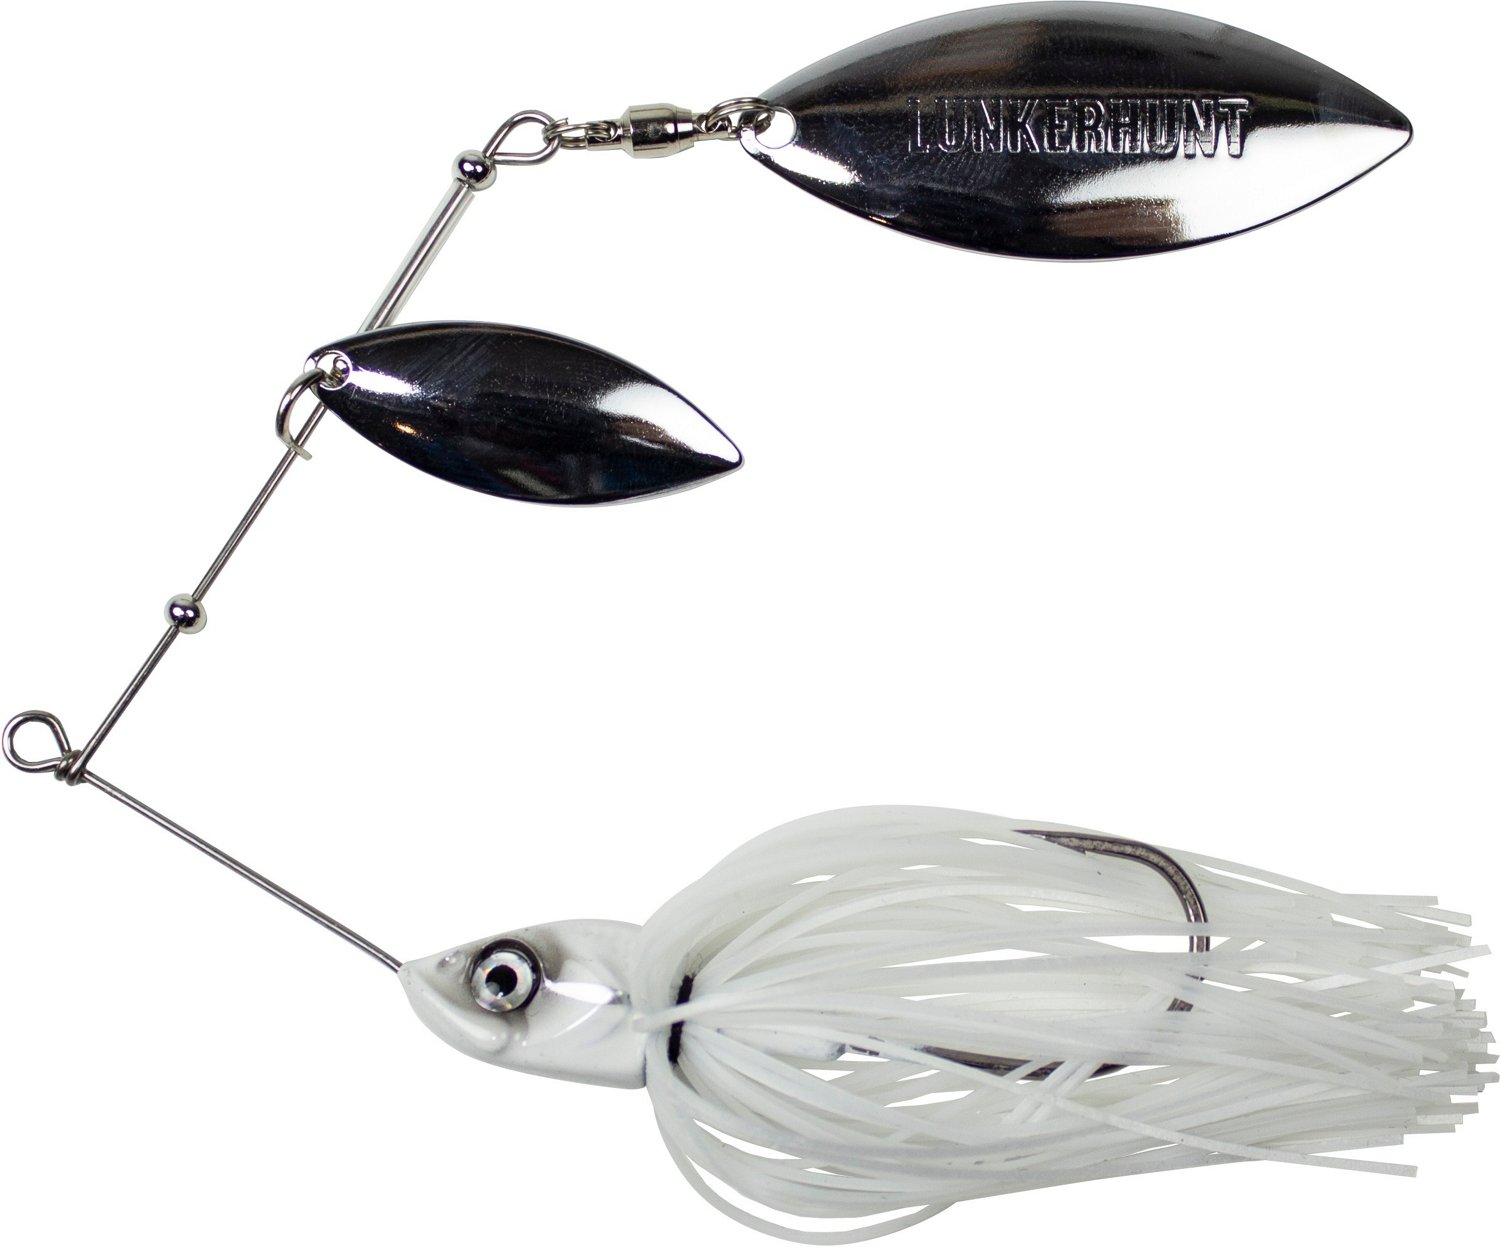 Academy Sports + Outdoors Lunkerhunt Impact Ignite Willow Leaf